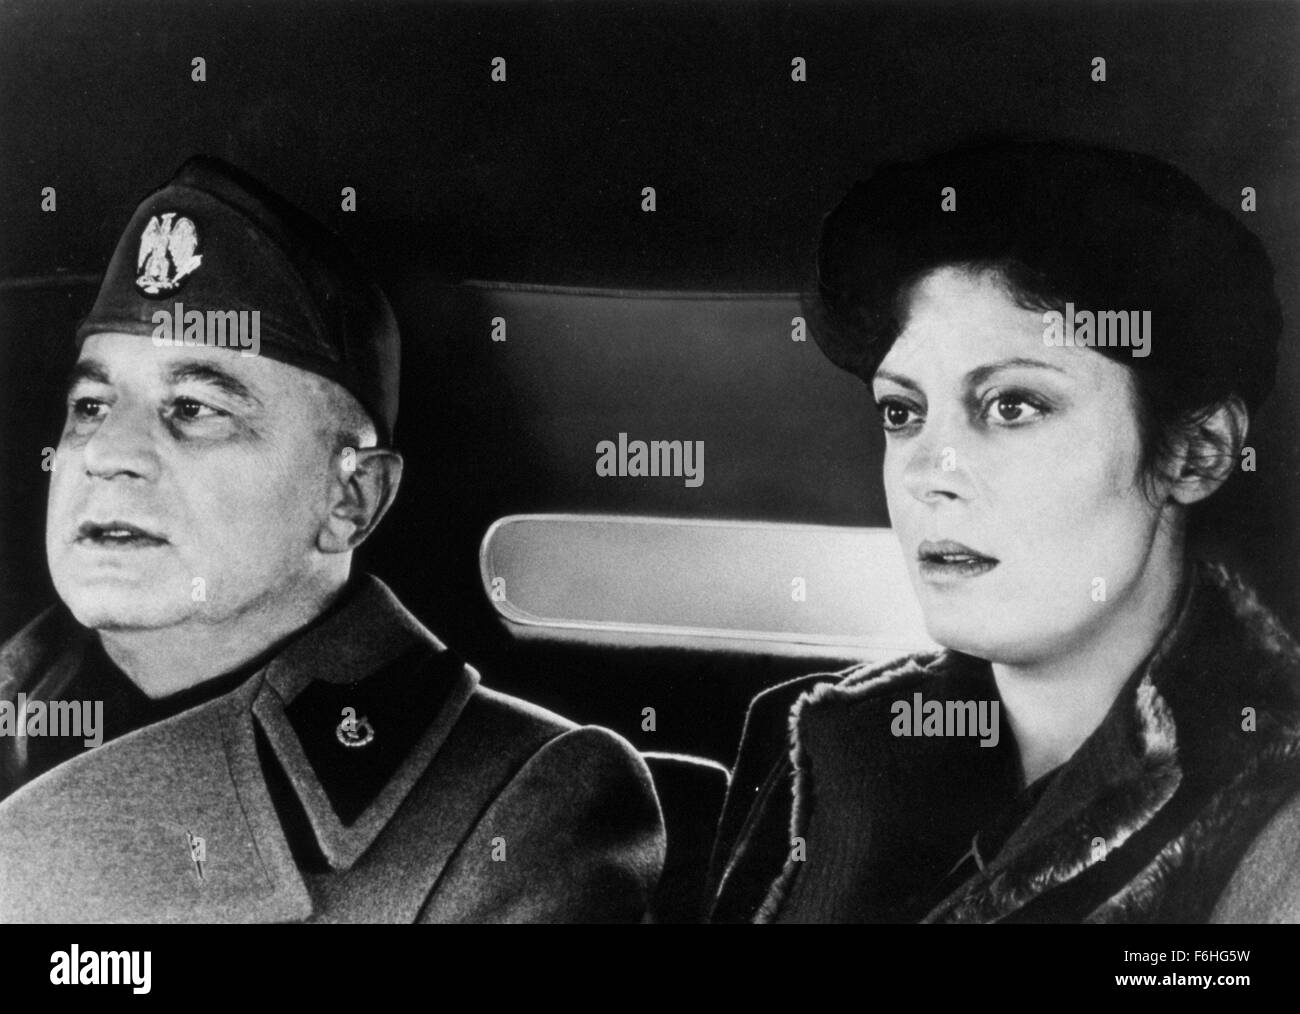 RELEASE DATE: September 8, 1985  MOVIE TITLE: Mussolini and I   DIRECTOR: Alberto Negrin  STUDIO: Beta Film  PLOT: A compelling drama/documentary chronicling the life and death of Il Duce himself, from his days as a terrorist to his alliance with Hitler to the betrayal of his son-in-law and untimely demise  PICTURED: BOB HOPKINS as Benito Mussolini and SUSAN SARANDON as Edda Mussolini Ciano  (Credit Image: c Beta Film/Entertainment Pictures) Stock Photo